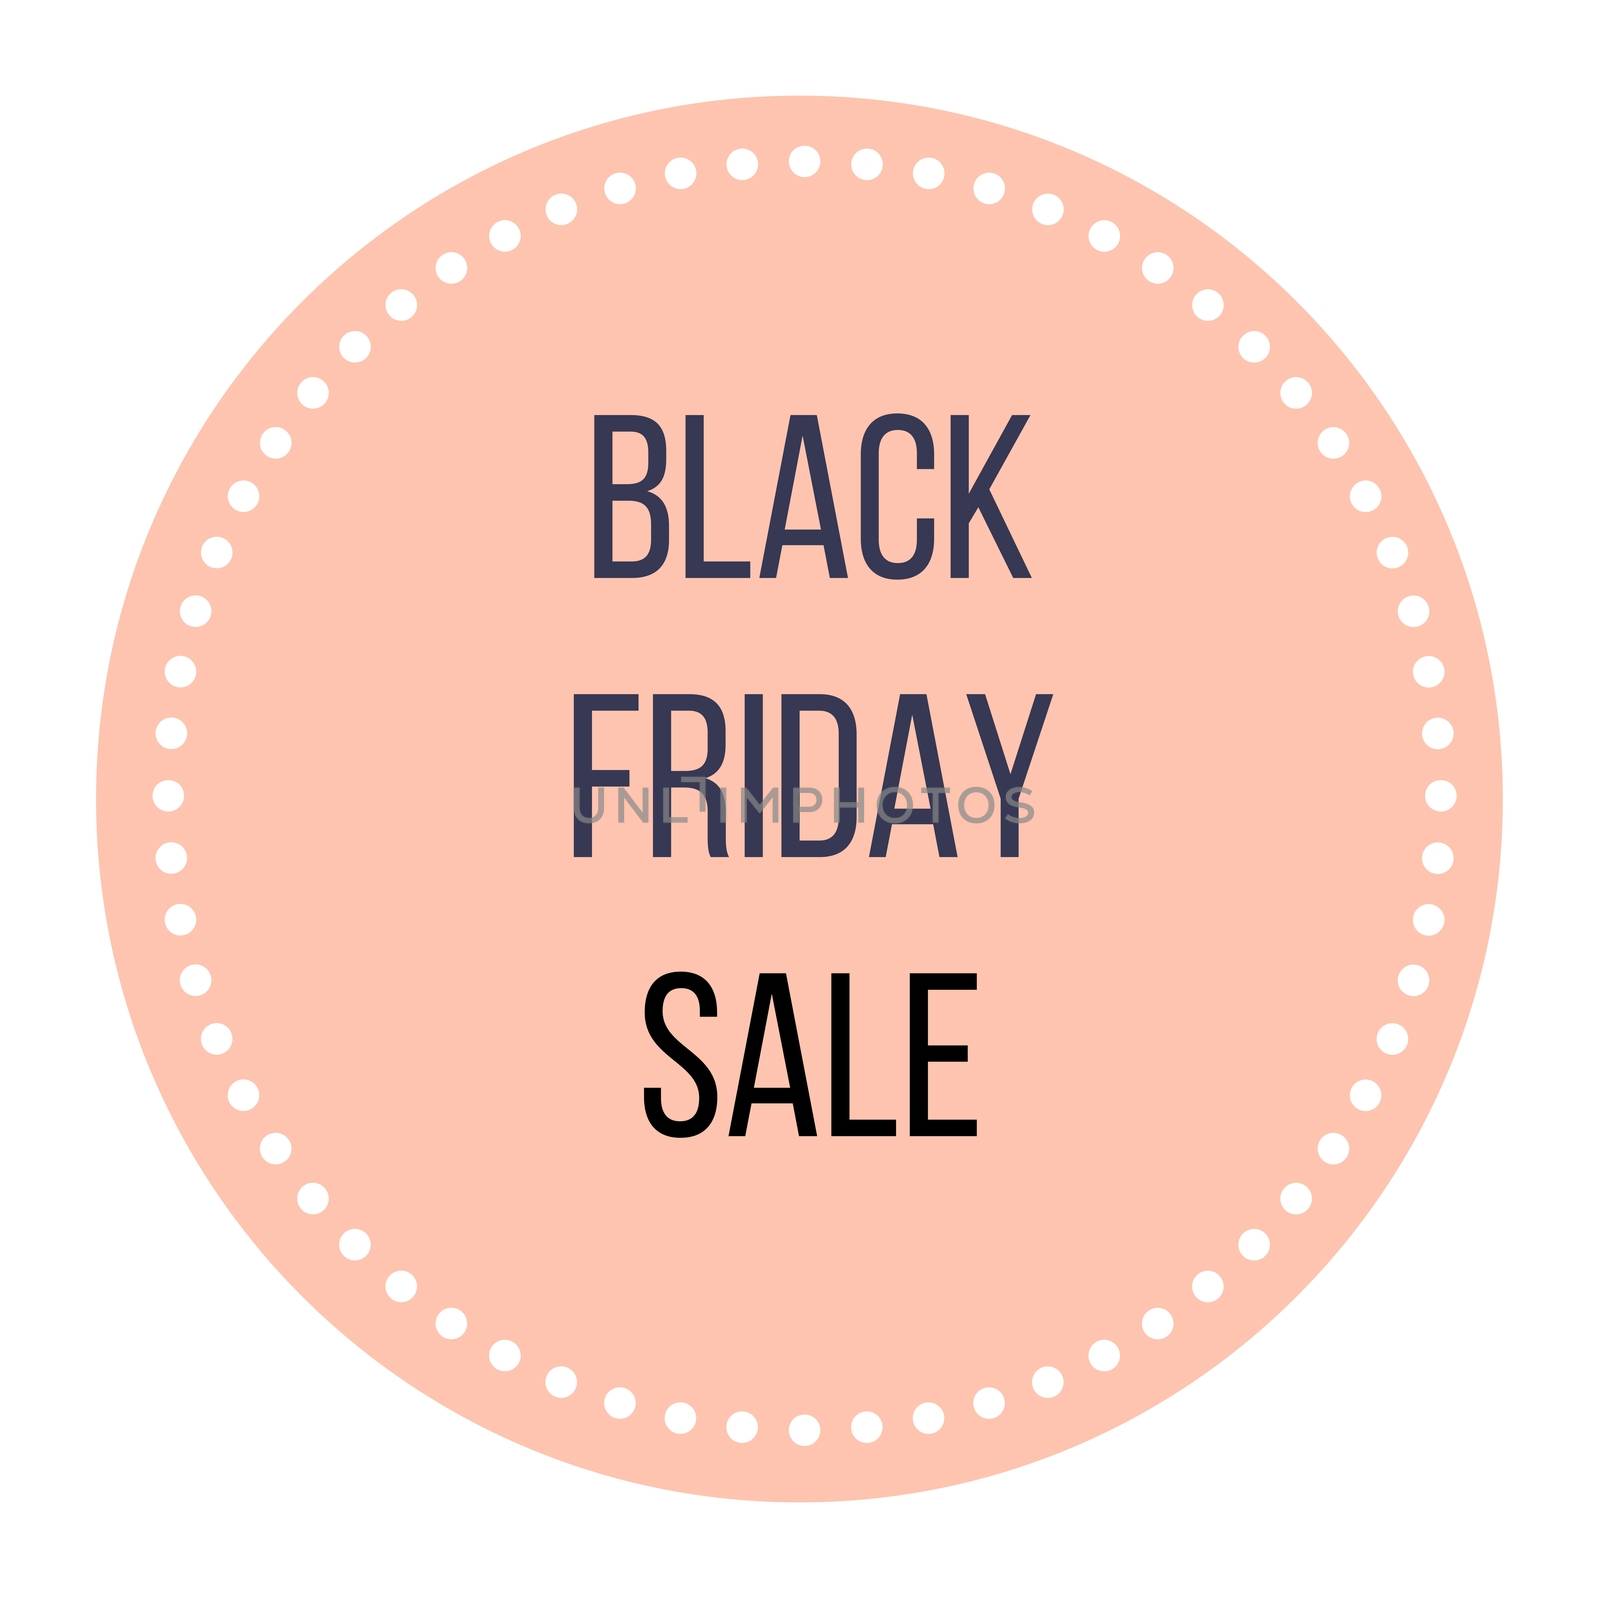 New in shop! Stylish sweet peach icon : BLACK FRIDAY SALE by Lordalea